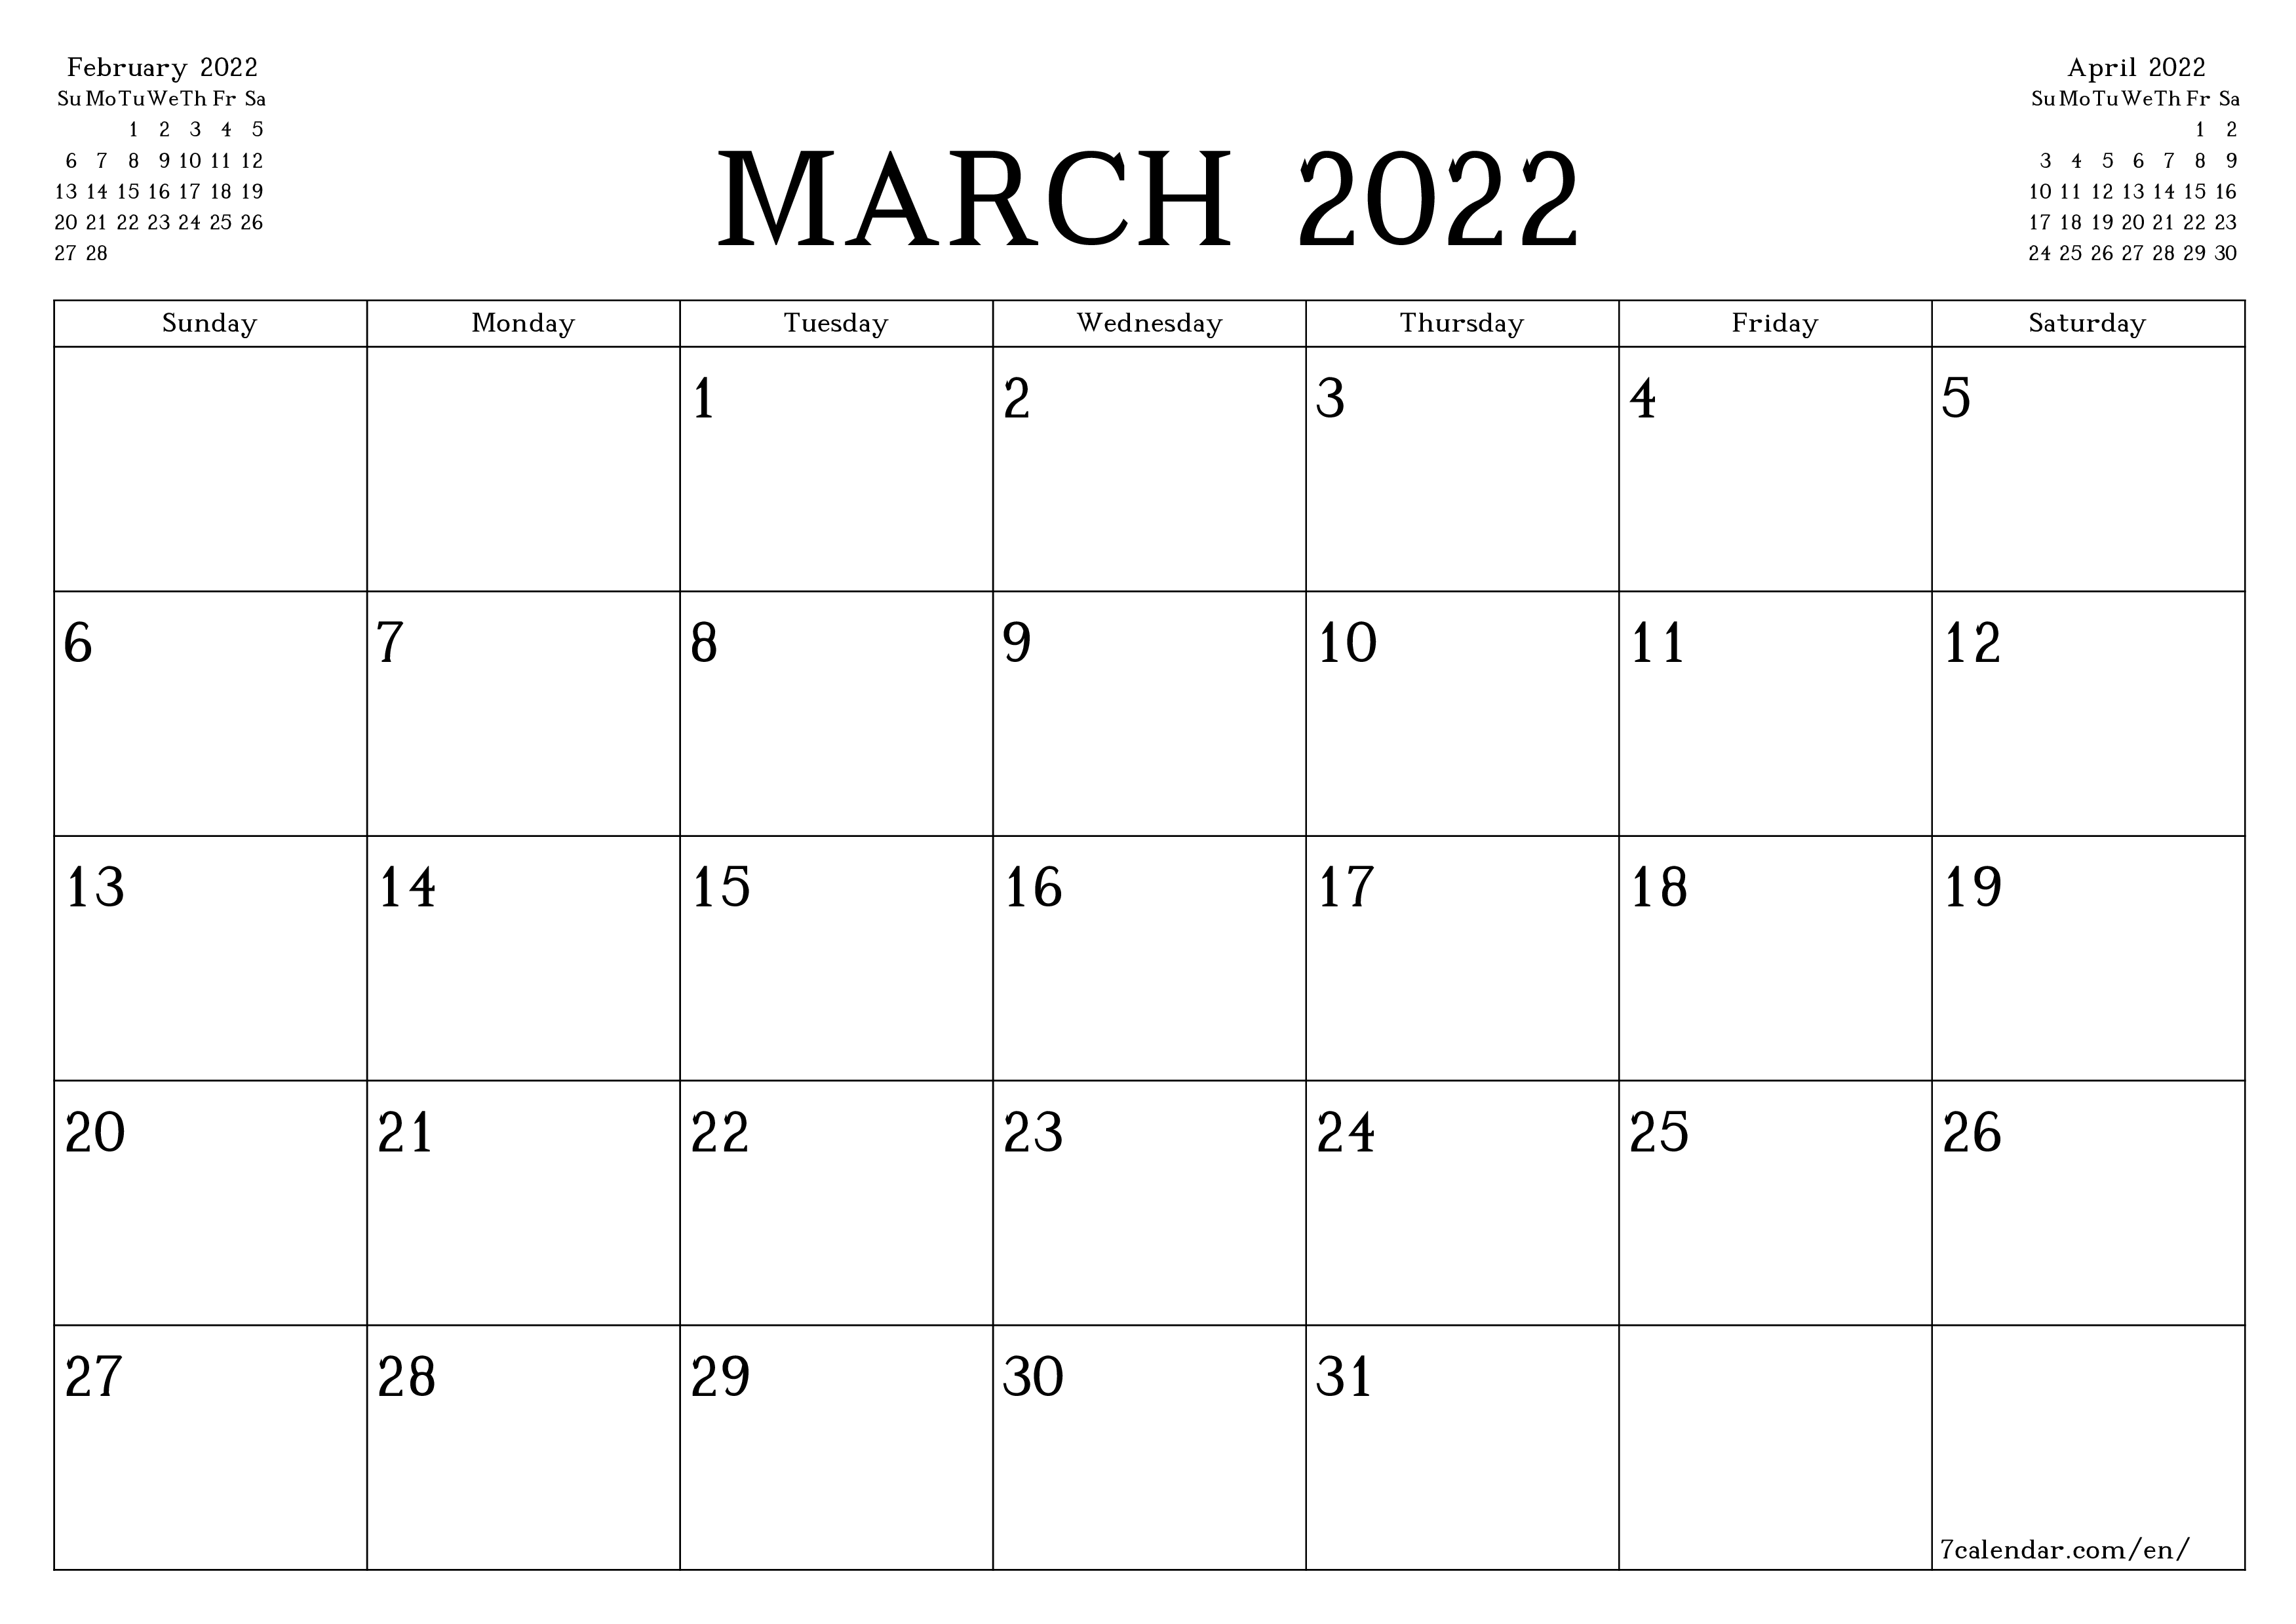 Monthly Calendar March 2022 March 2022 Free Printable Calendars And Planners, Pdf Templates - 7Calendar